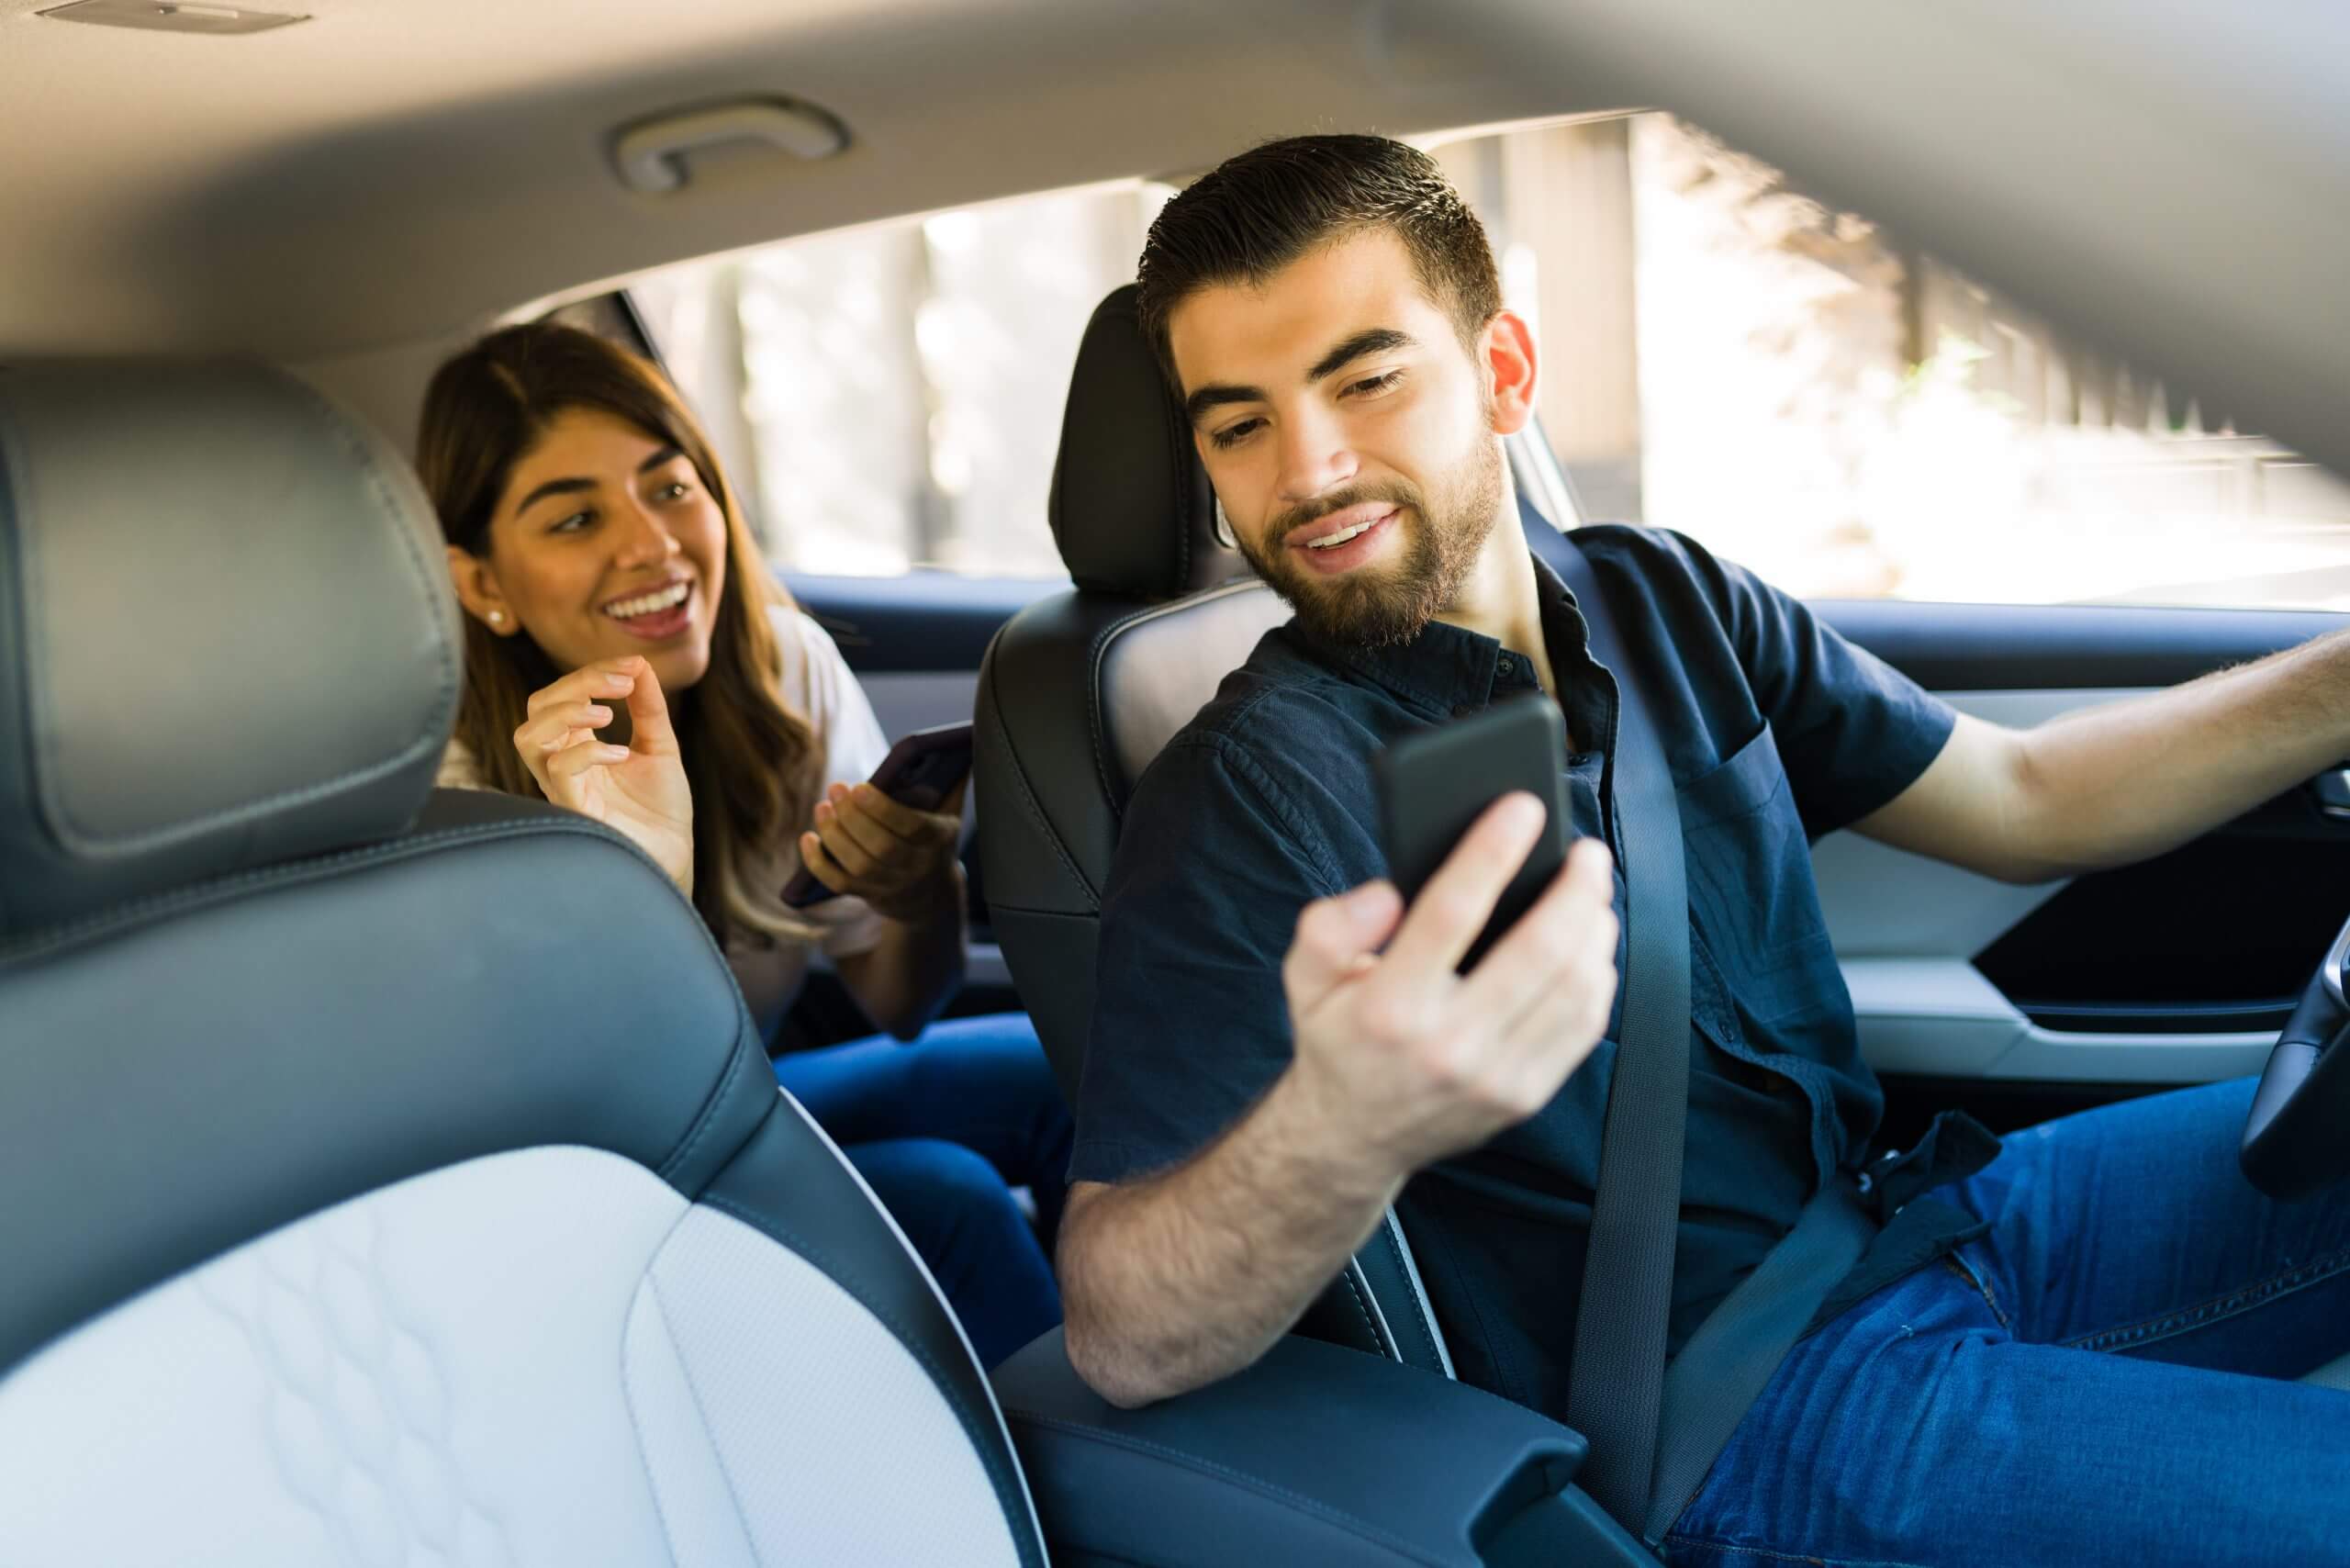 How Much Does Progressive Rideshare Insurance Cost